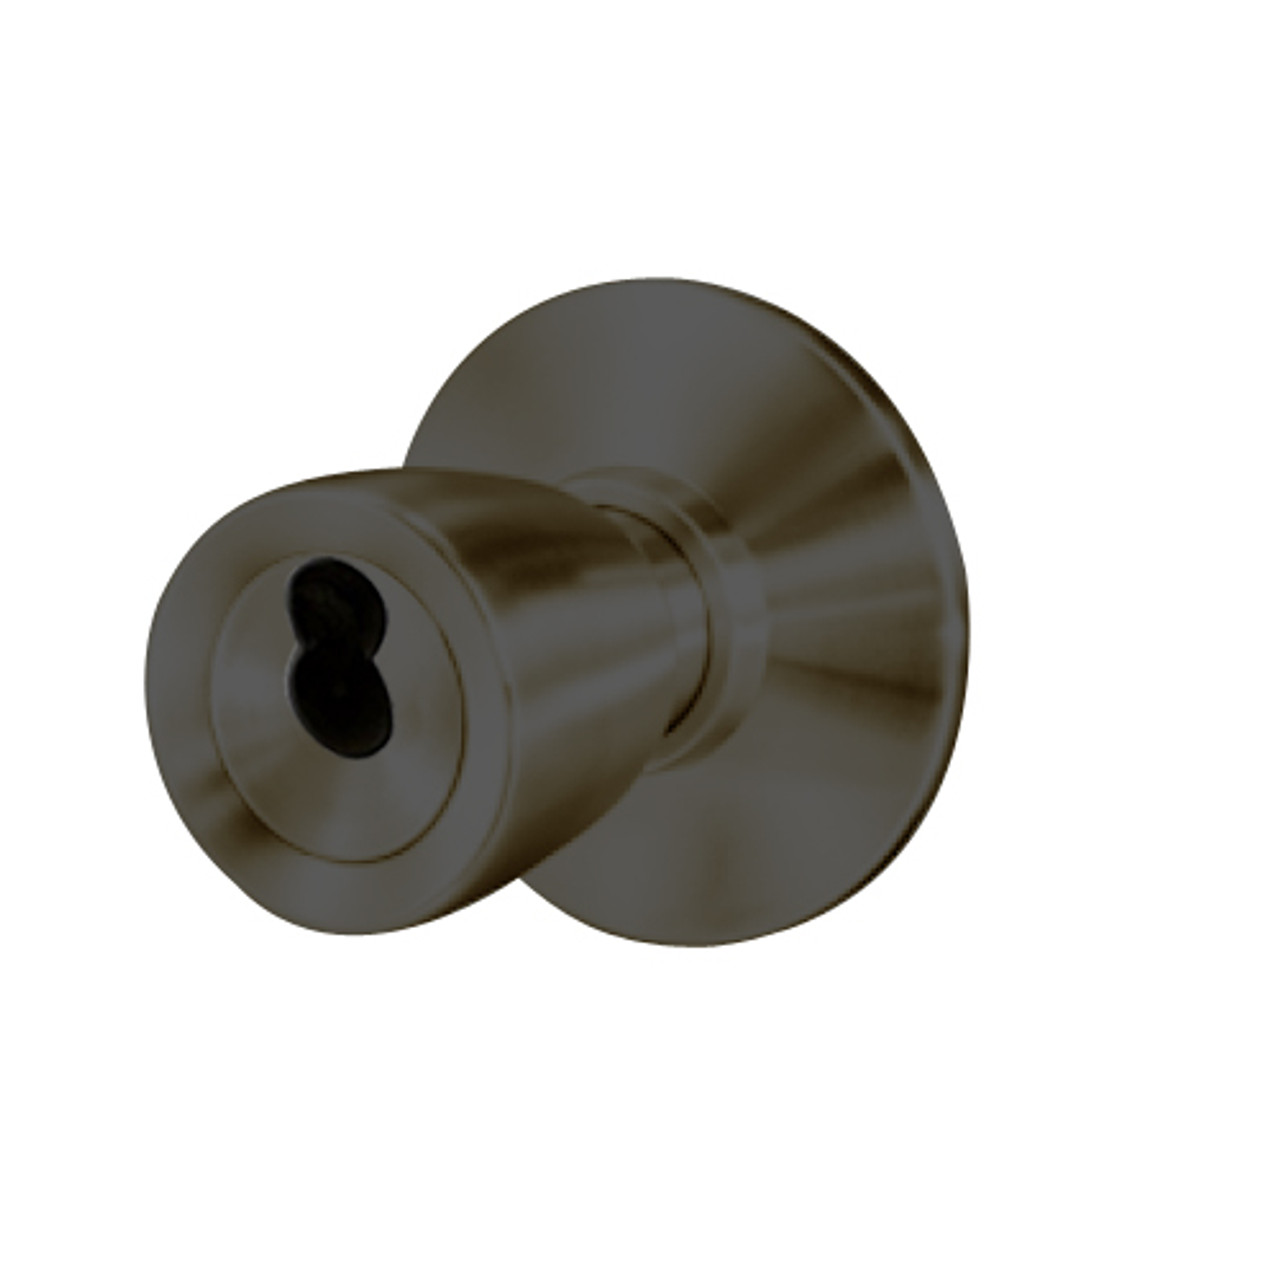 8K37XR6DS3613 Best 8K Series Special Heavy Duty Cylindrical Knob Locks with Tulip Style in Oil Rubbed Bronze